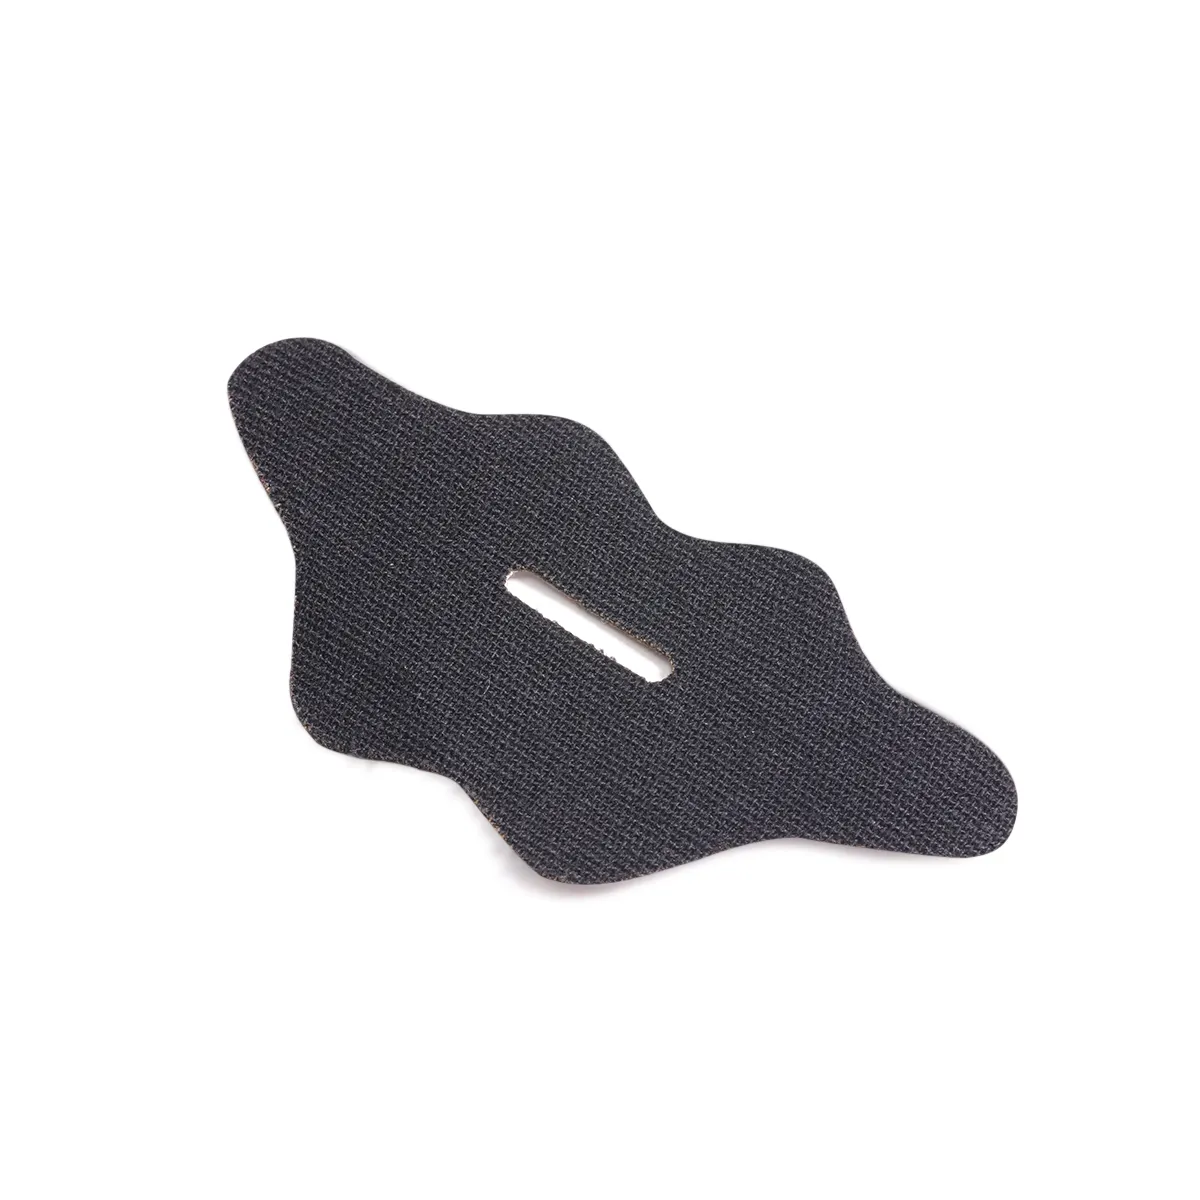 Mouth Tape Closed Mouth Breathing Patch Closed Mouth Sleeping Lip Sealing Patch